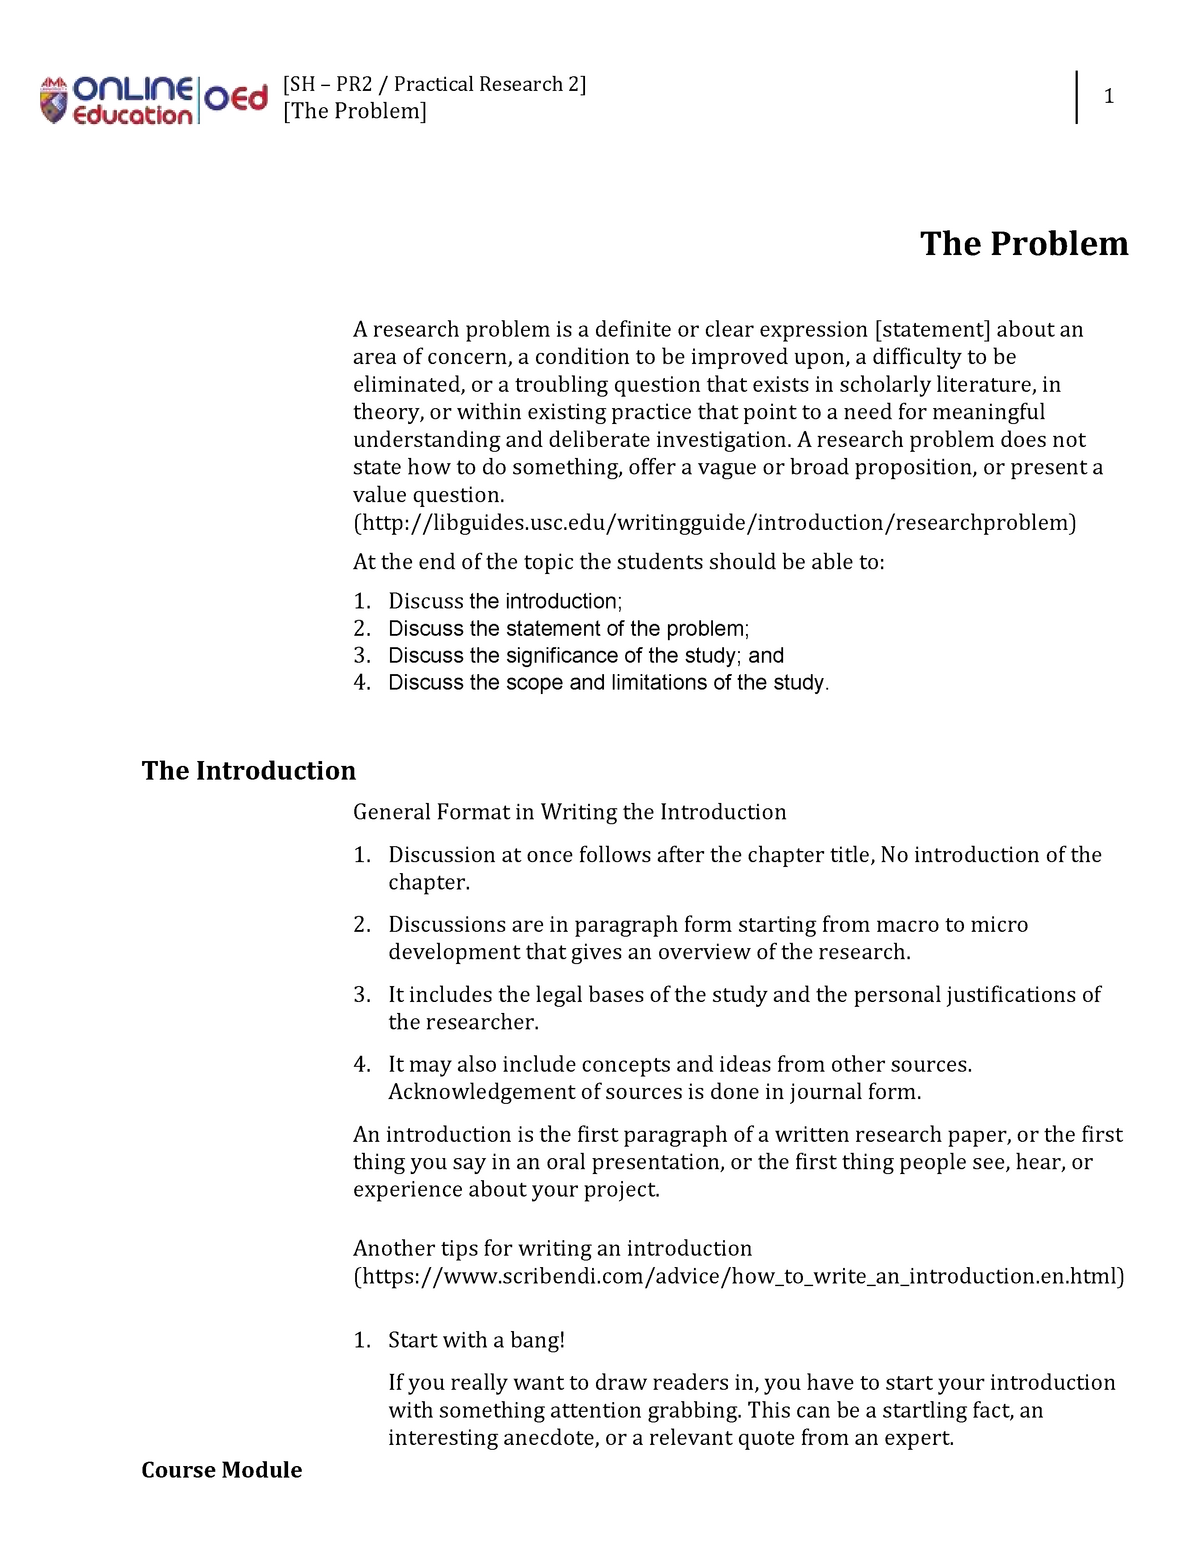 statement of the problem in practical research